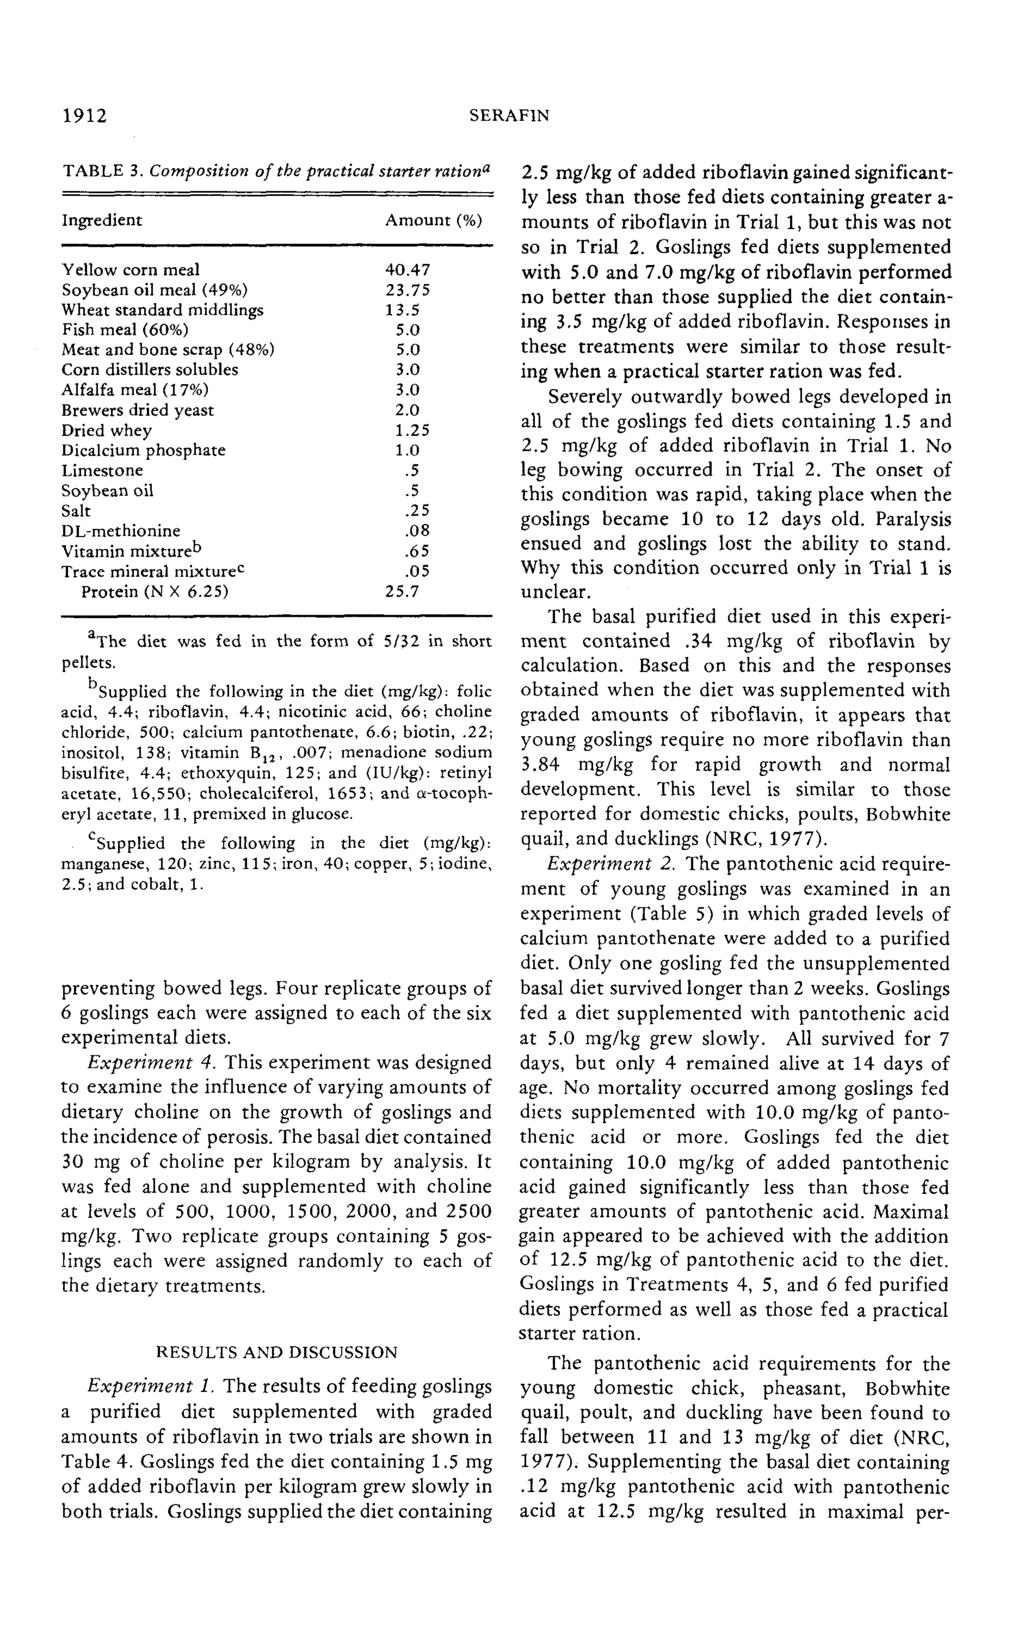 1912 SERAFIN TABLE 3. Composition of the practical starter ration" Ingredient Amount (%) Yellow corn meal.7 Soybean oil meal (9%) 23.75 Wheat standard middlings 13.5 Fish meal (6%) 5.